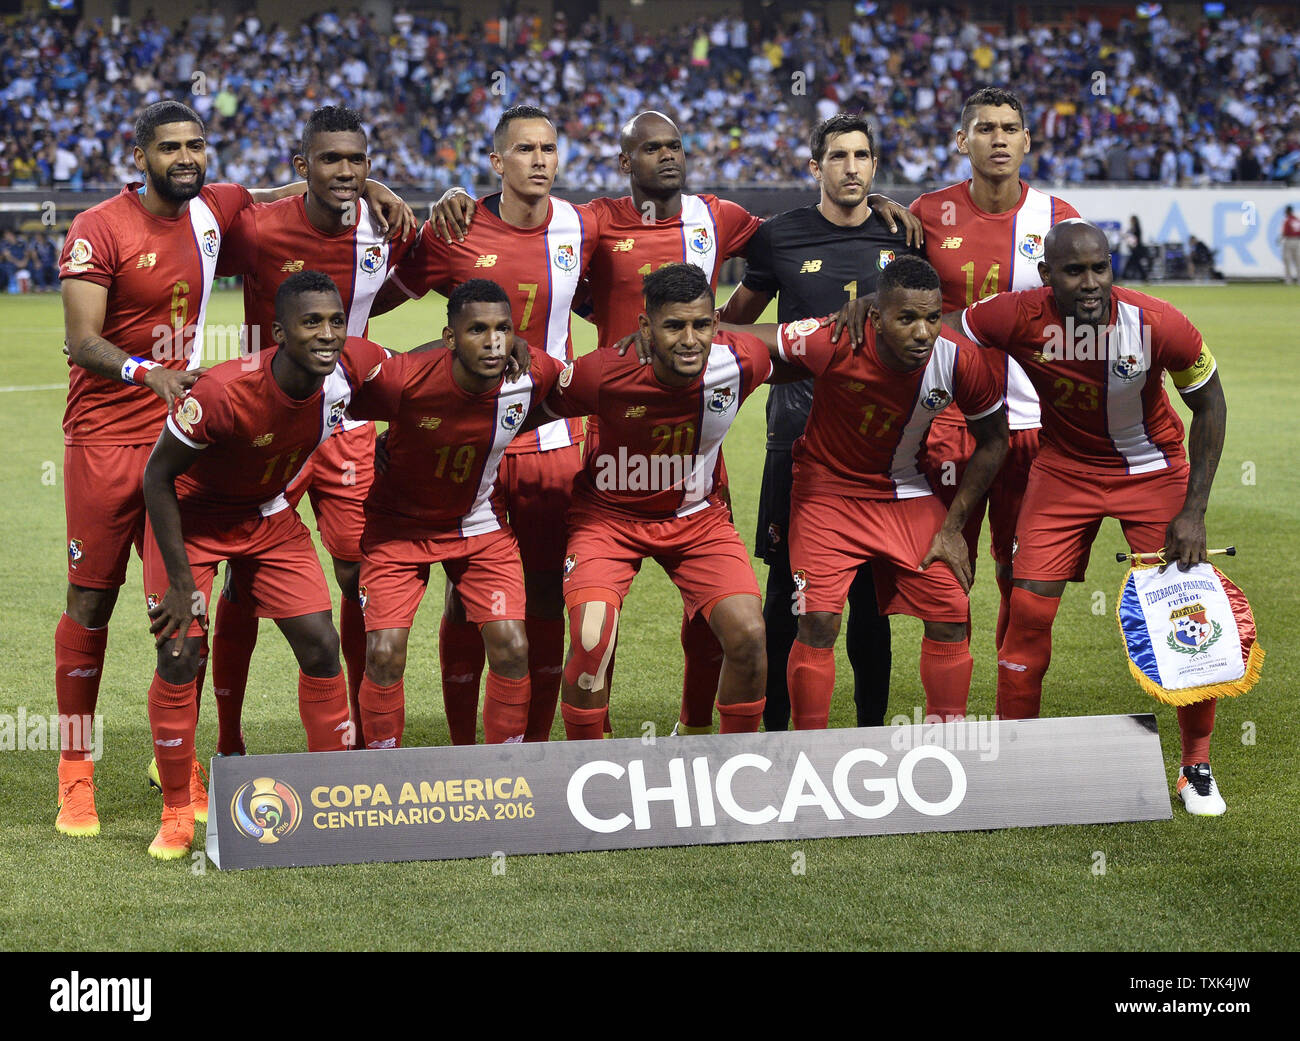 Panama's starting eleven players (Back, L-R) Gabriel Gomez, Roderick Miller, Blas Perez, Adolfo Machado, Jaime Penedo, Valentin Pimentel, (Front, L-R) Armando Cooper, Alberto Quintero, Anibal Godoy, Luis Henriquez and Felipe Baloy pose for a team photo before the 2016 Copa America Centenario Group D match against Argentina at Soldier Field in Chicago on June 10, 2016. Argentina defeated Panama 5-0.     Photo by Brian Kersey/UPI Stock Photo